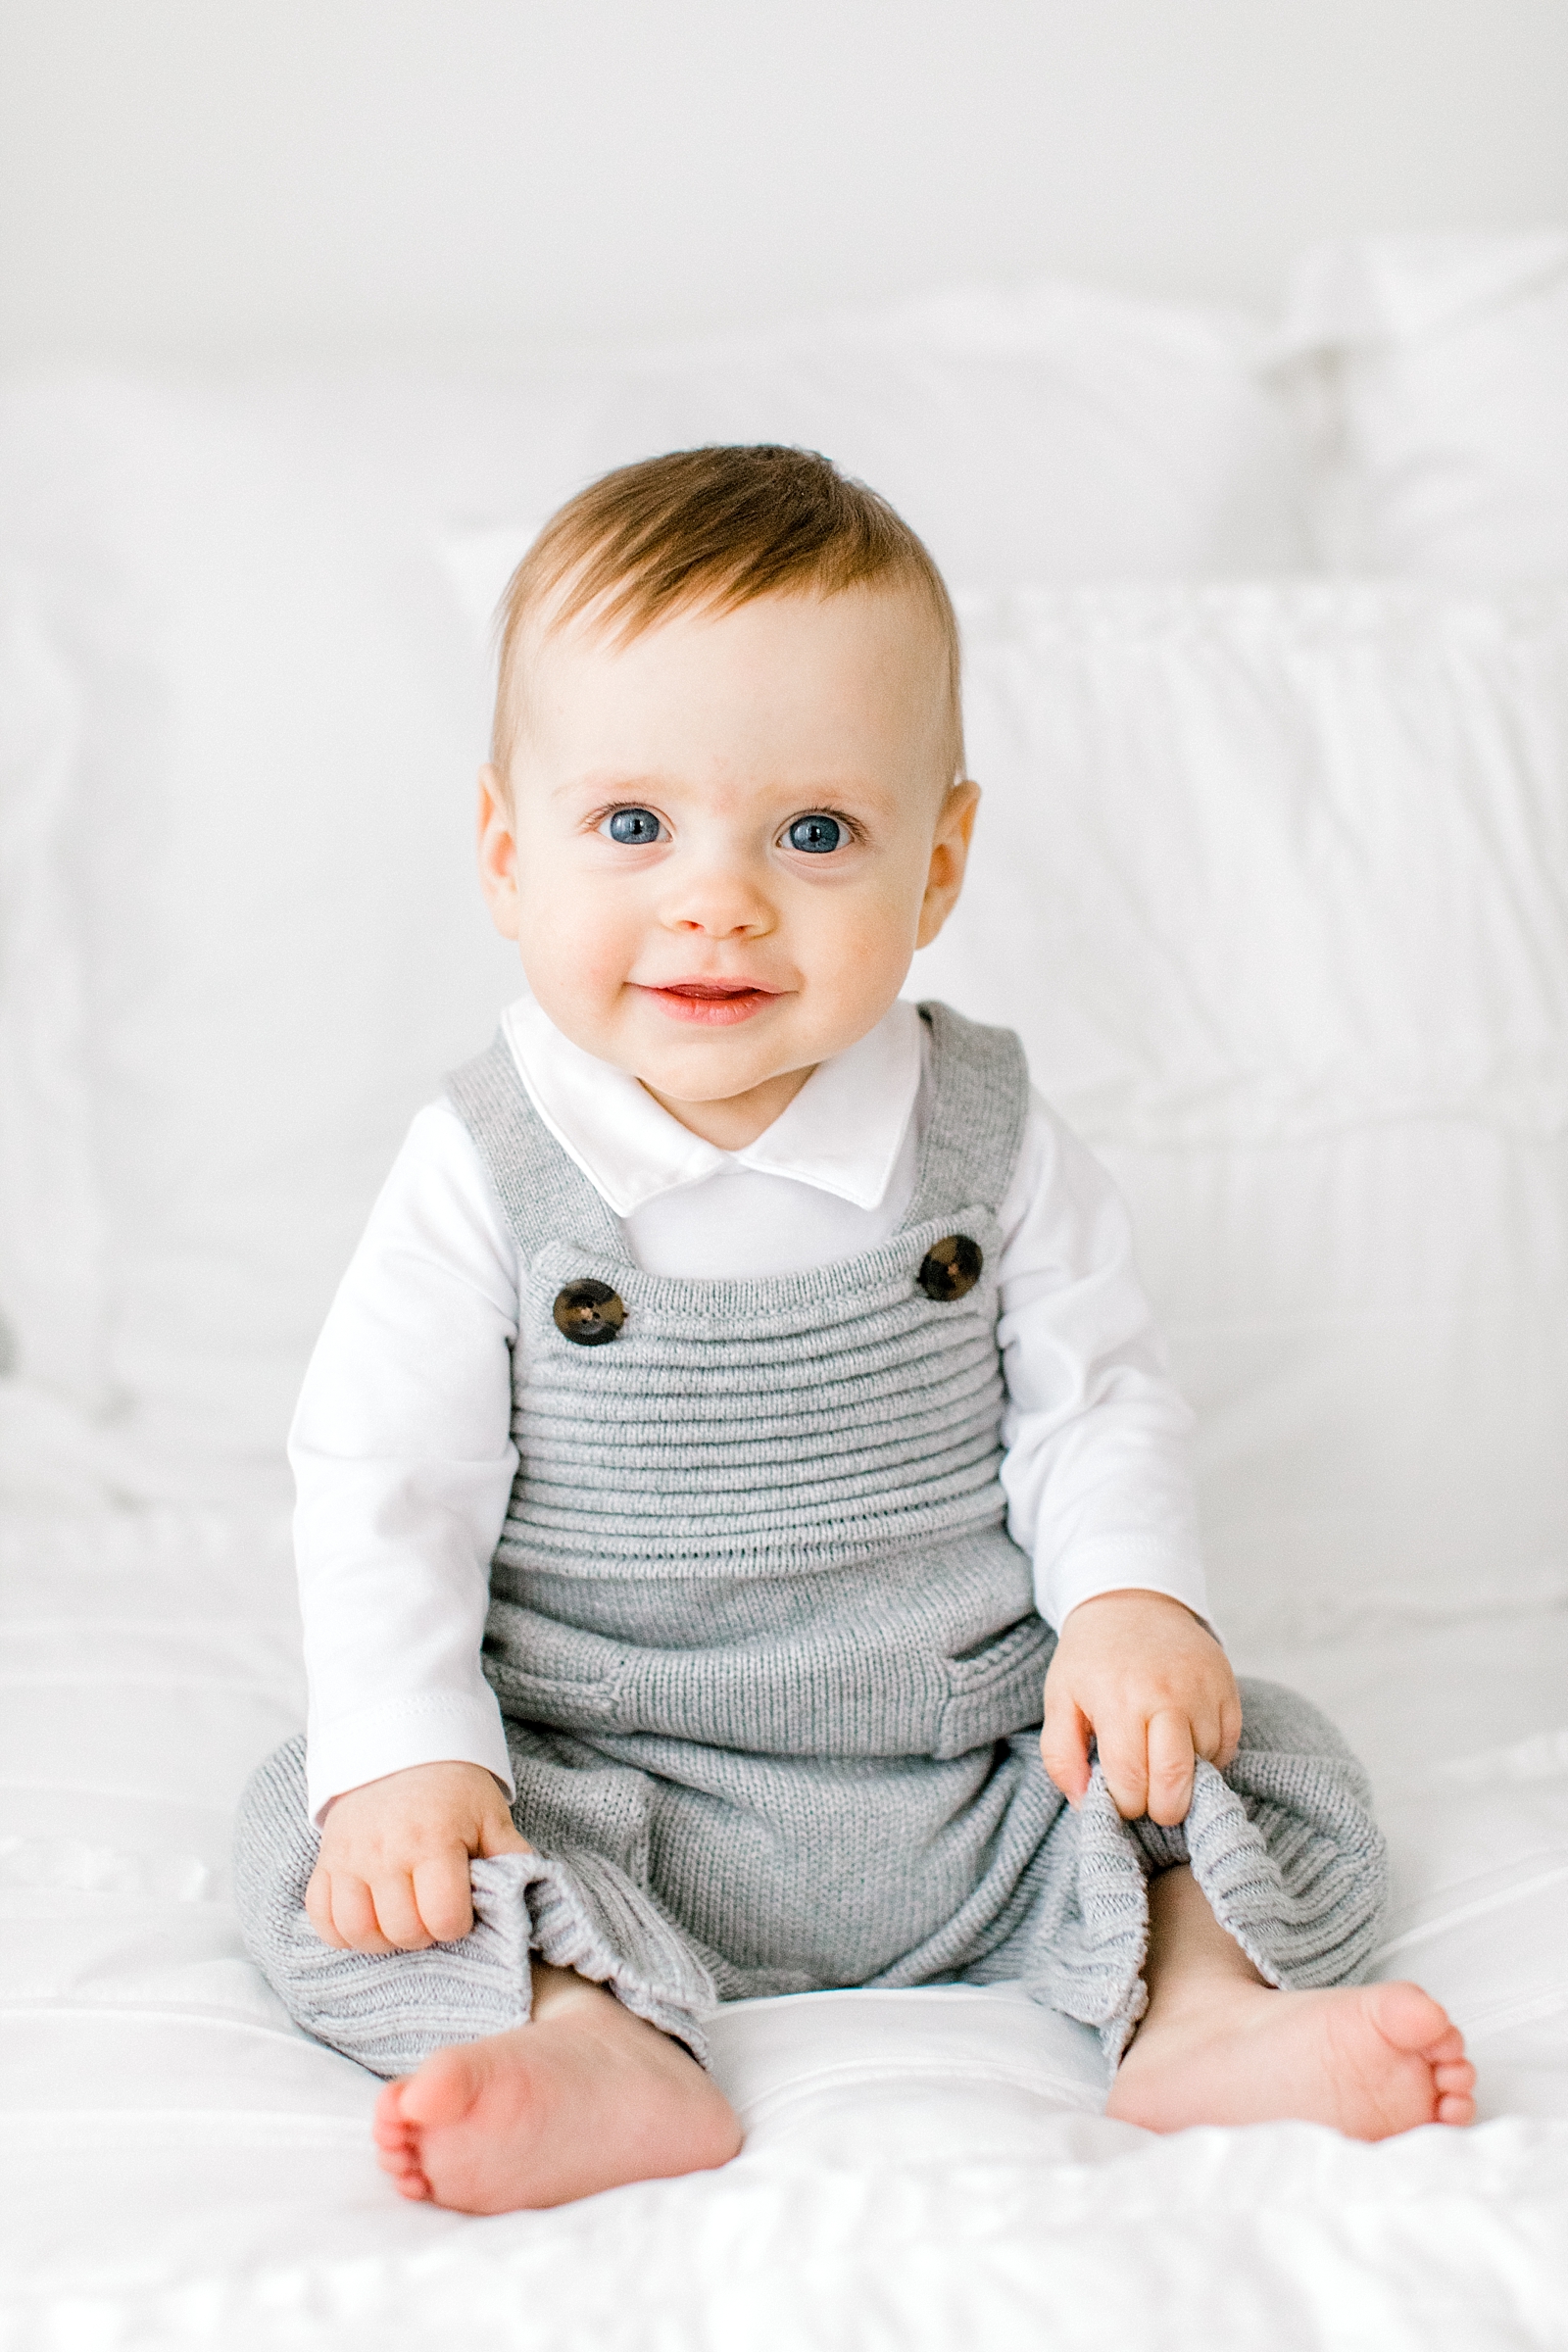 6 Month Milestone with Henry | Greenville Natural Light Studio ...